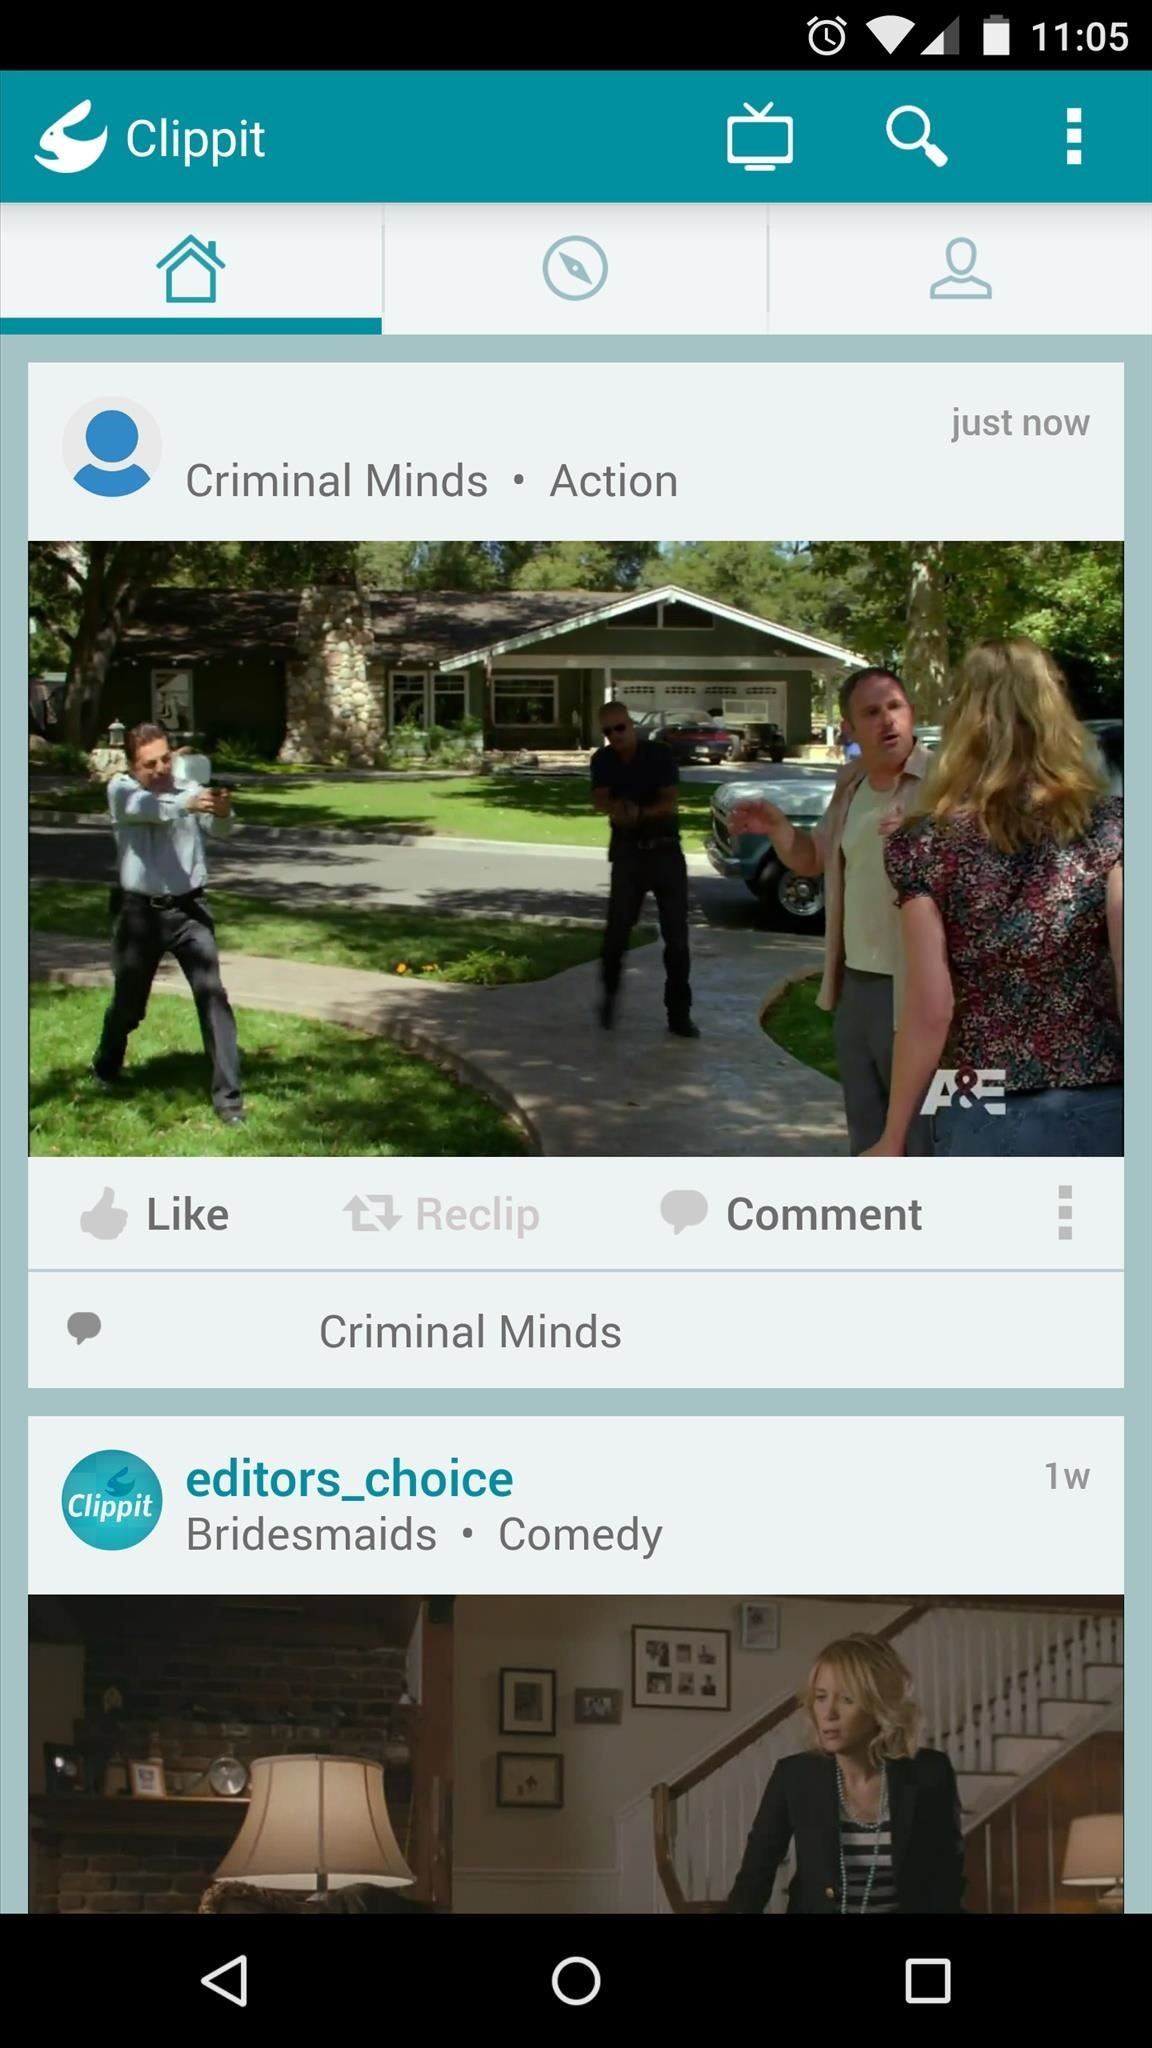 Share Clips of Your Favorite TV Moments with Friends